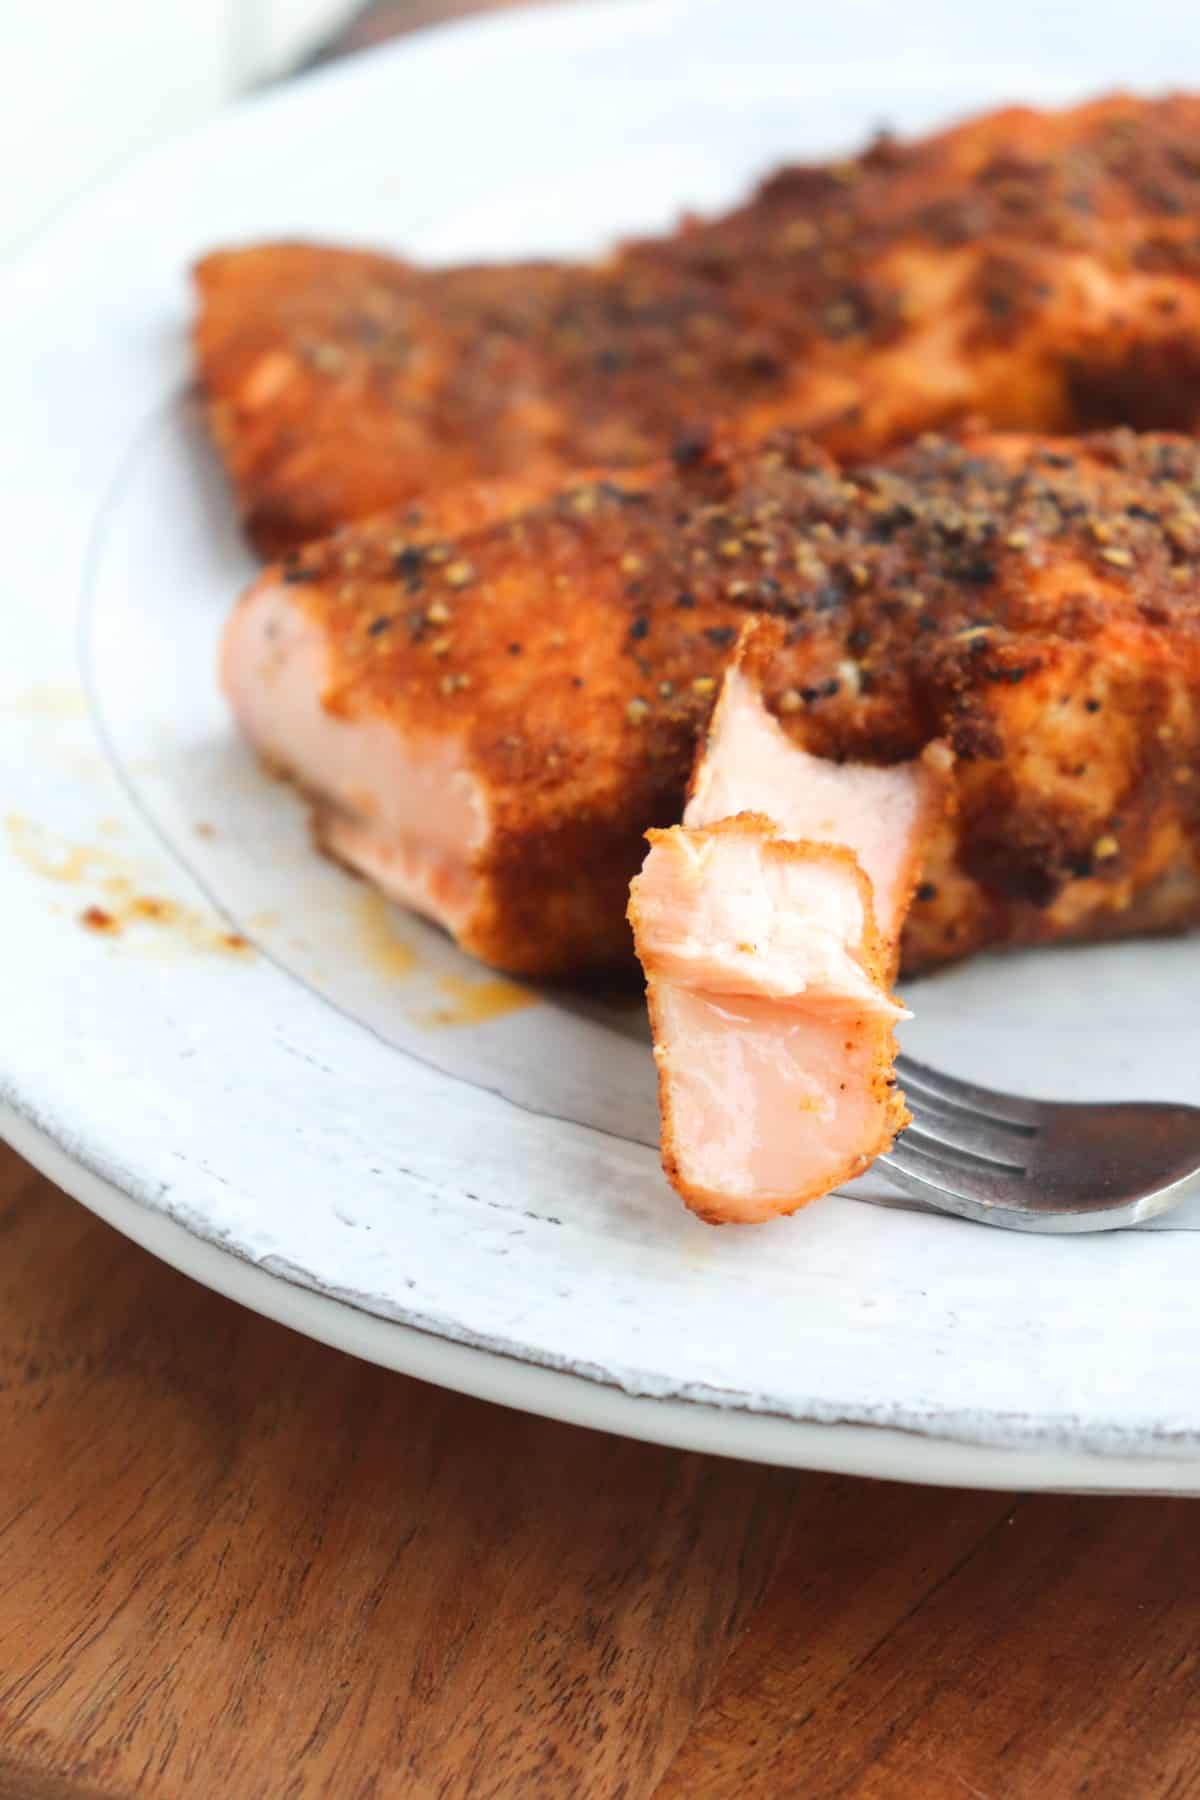 cooked salmon on a plate with a fork holding a bite.